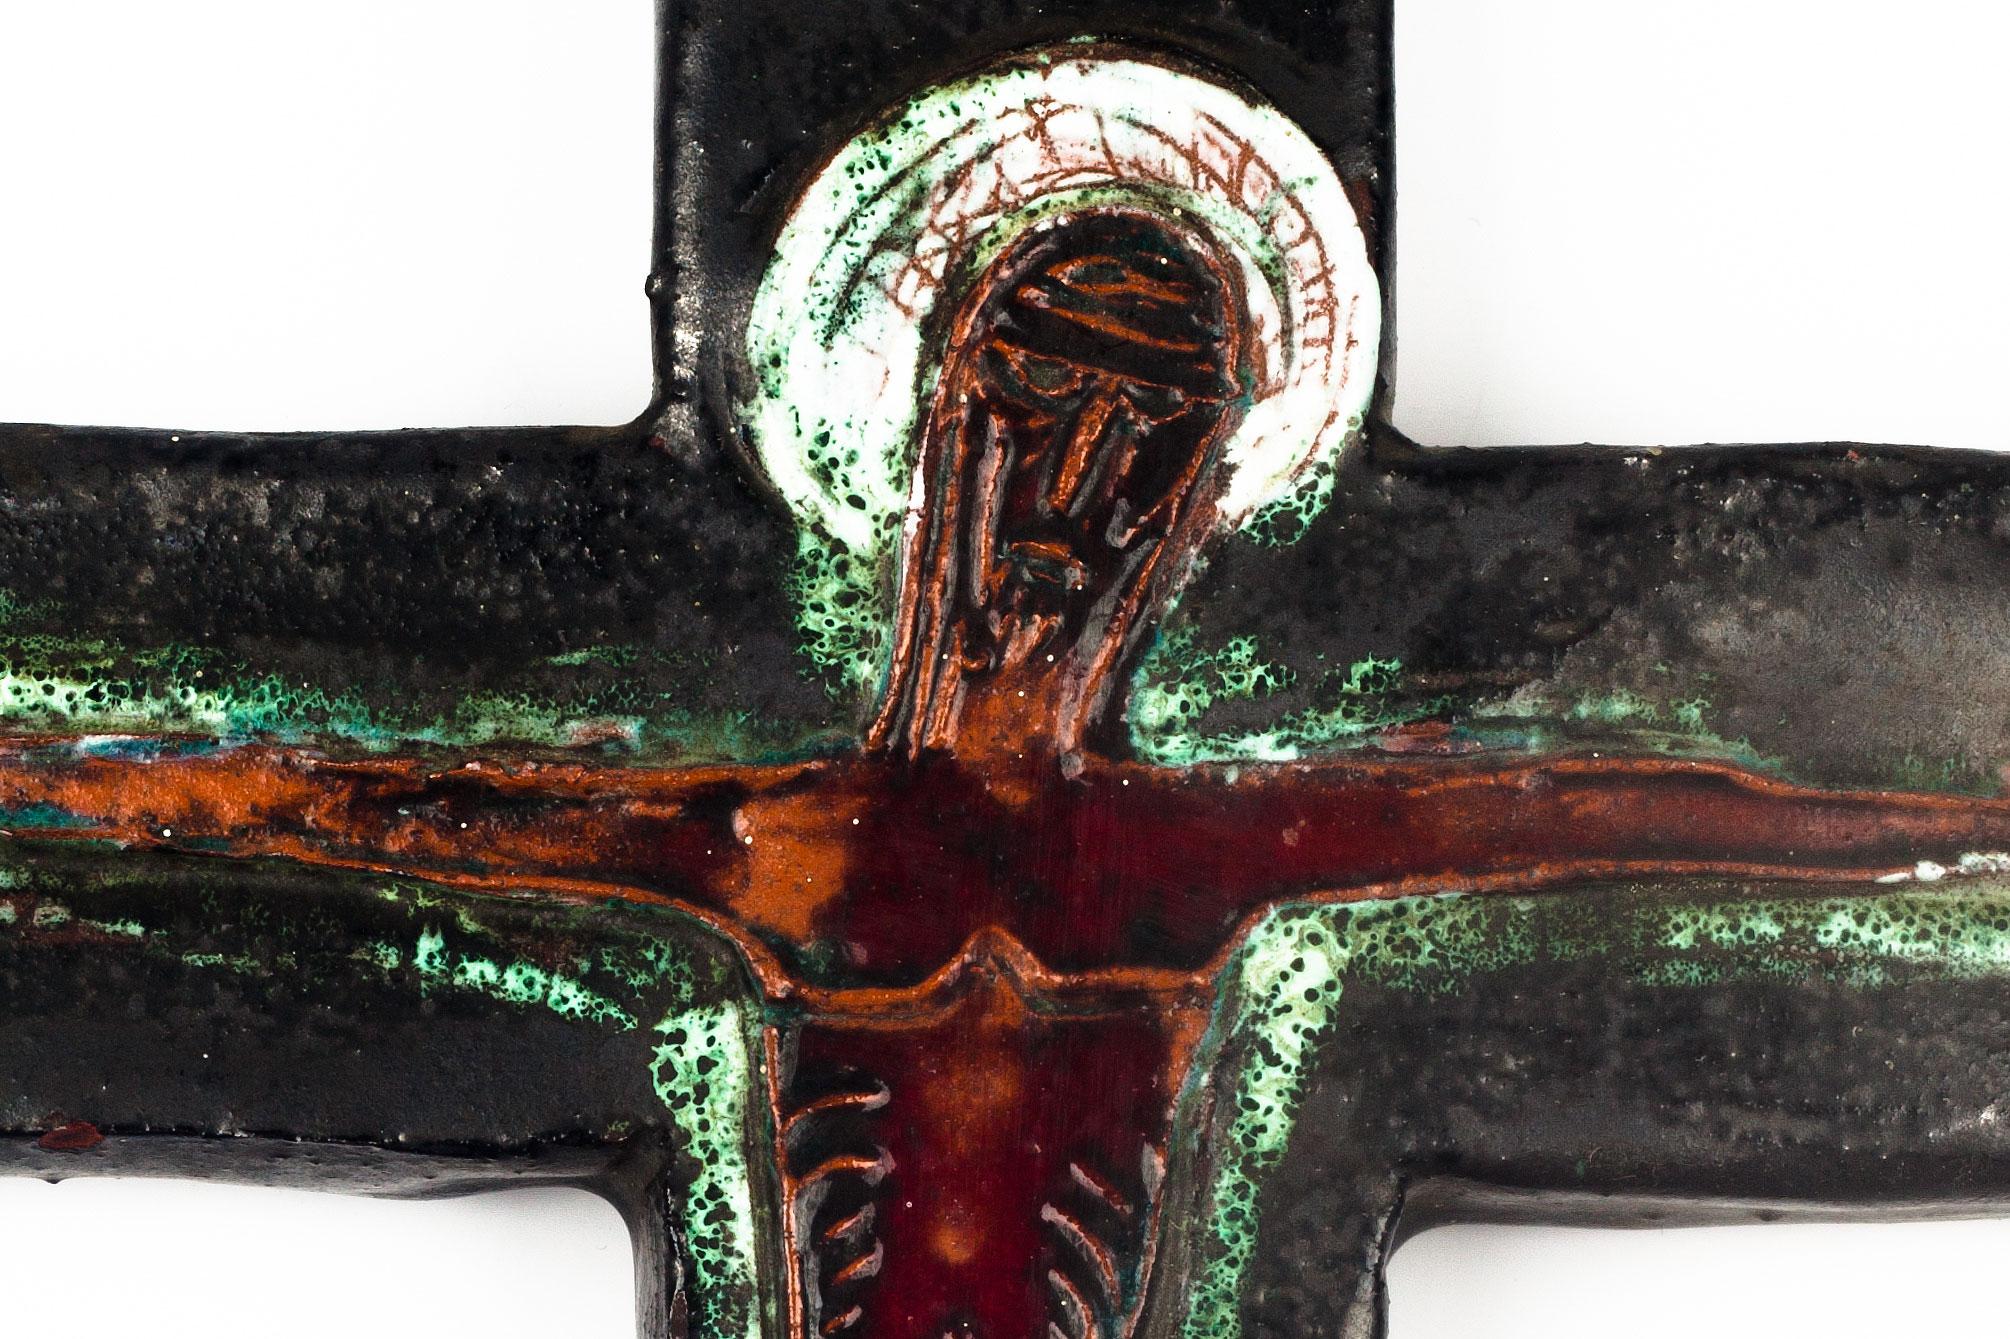 Large crucifix in matte textured and glazed ceramic, handmade made in Belgium in the 1970s. Matte cross in dark and light green, brown, red, white with glazed red-brown Christ figure at its centre. 

This piece is part of a large ceramic crucifix